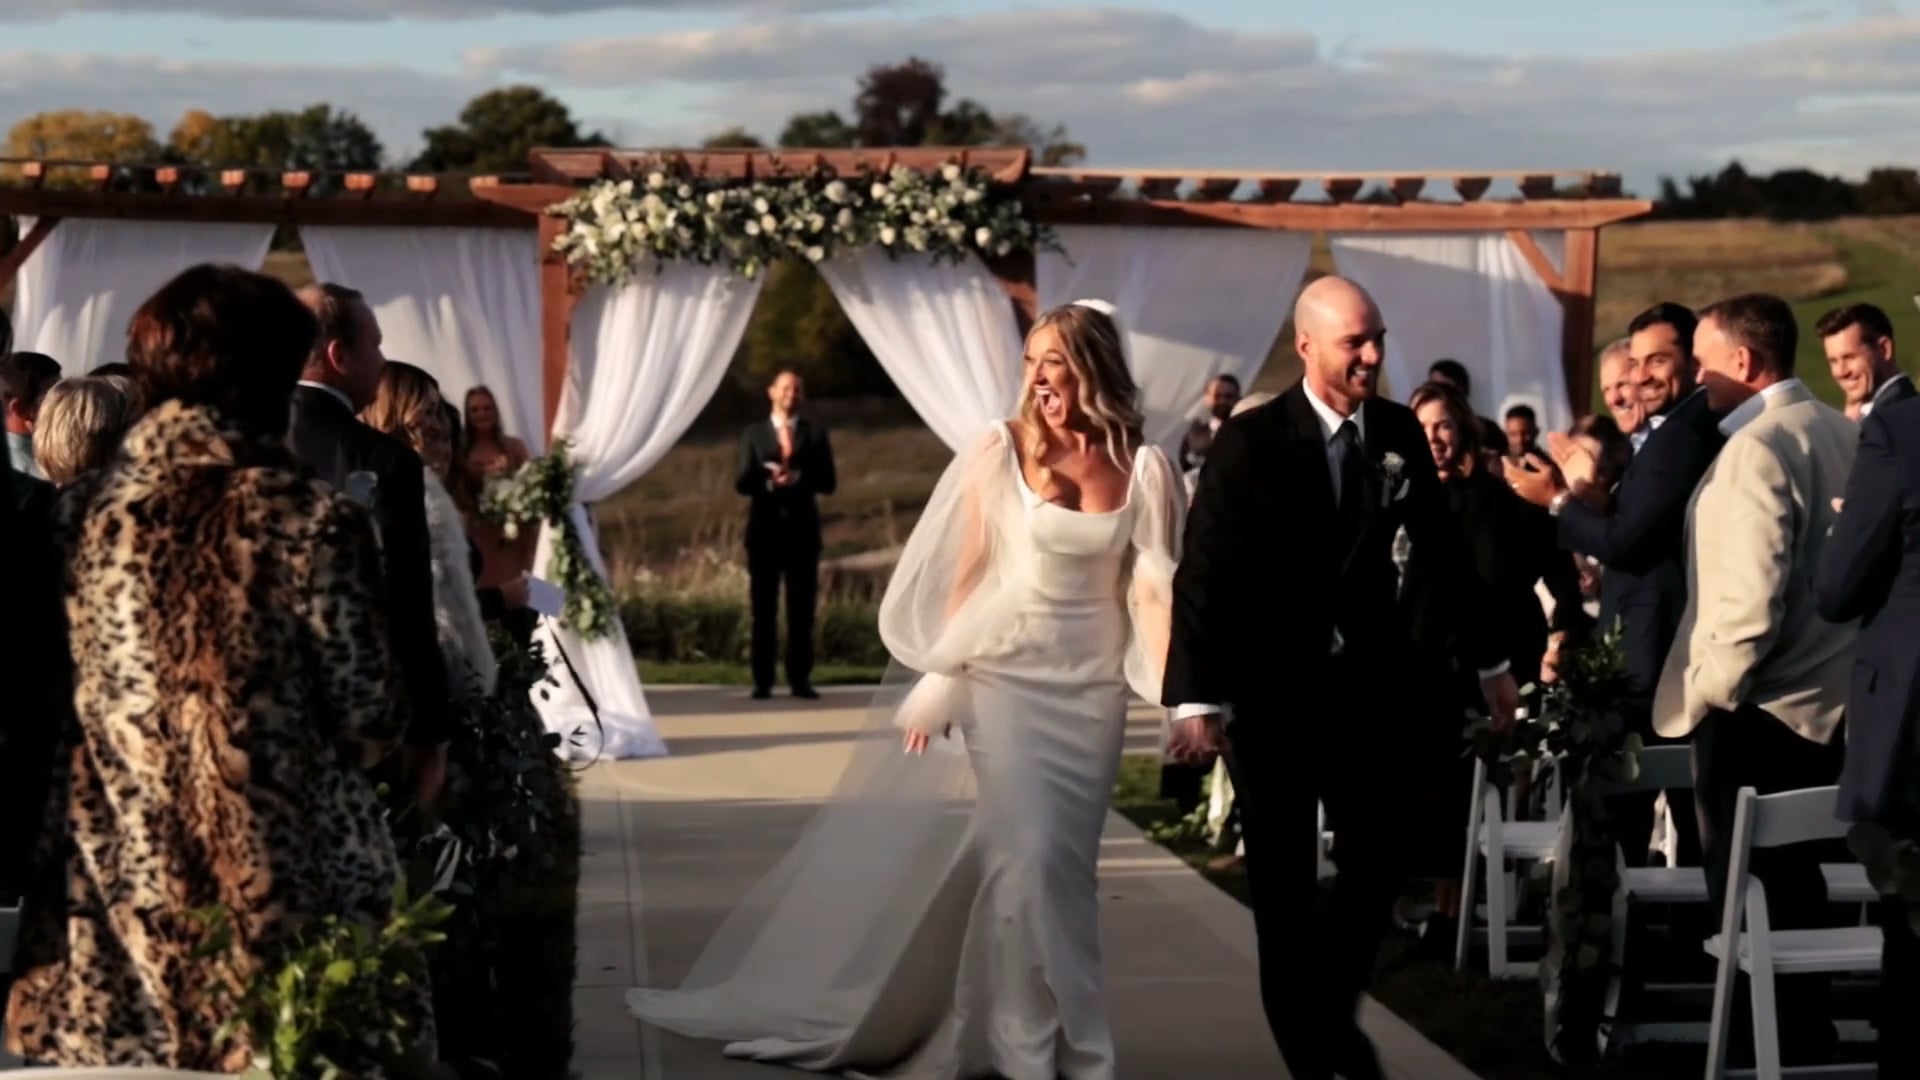 Wedding film by Iowa based videographer Twelve One Projects